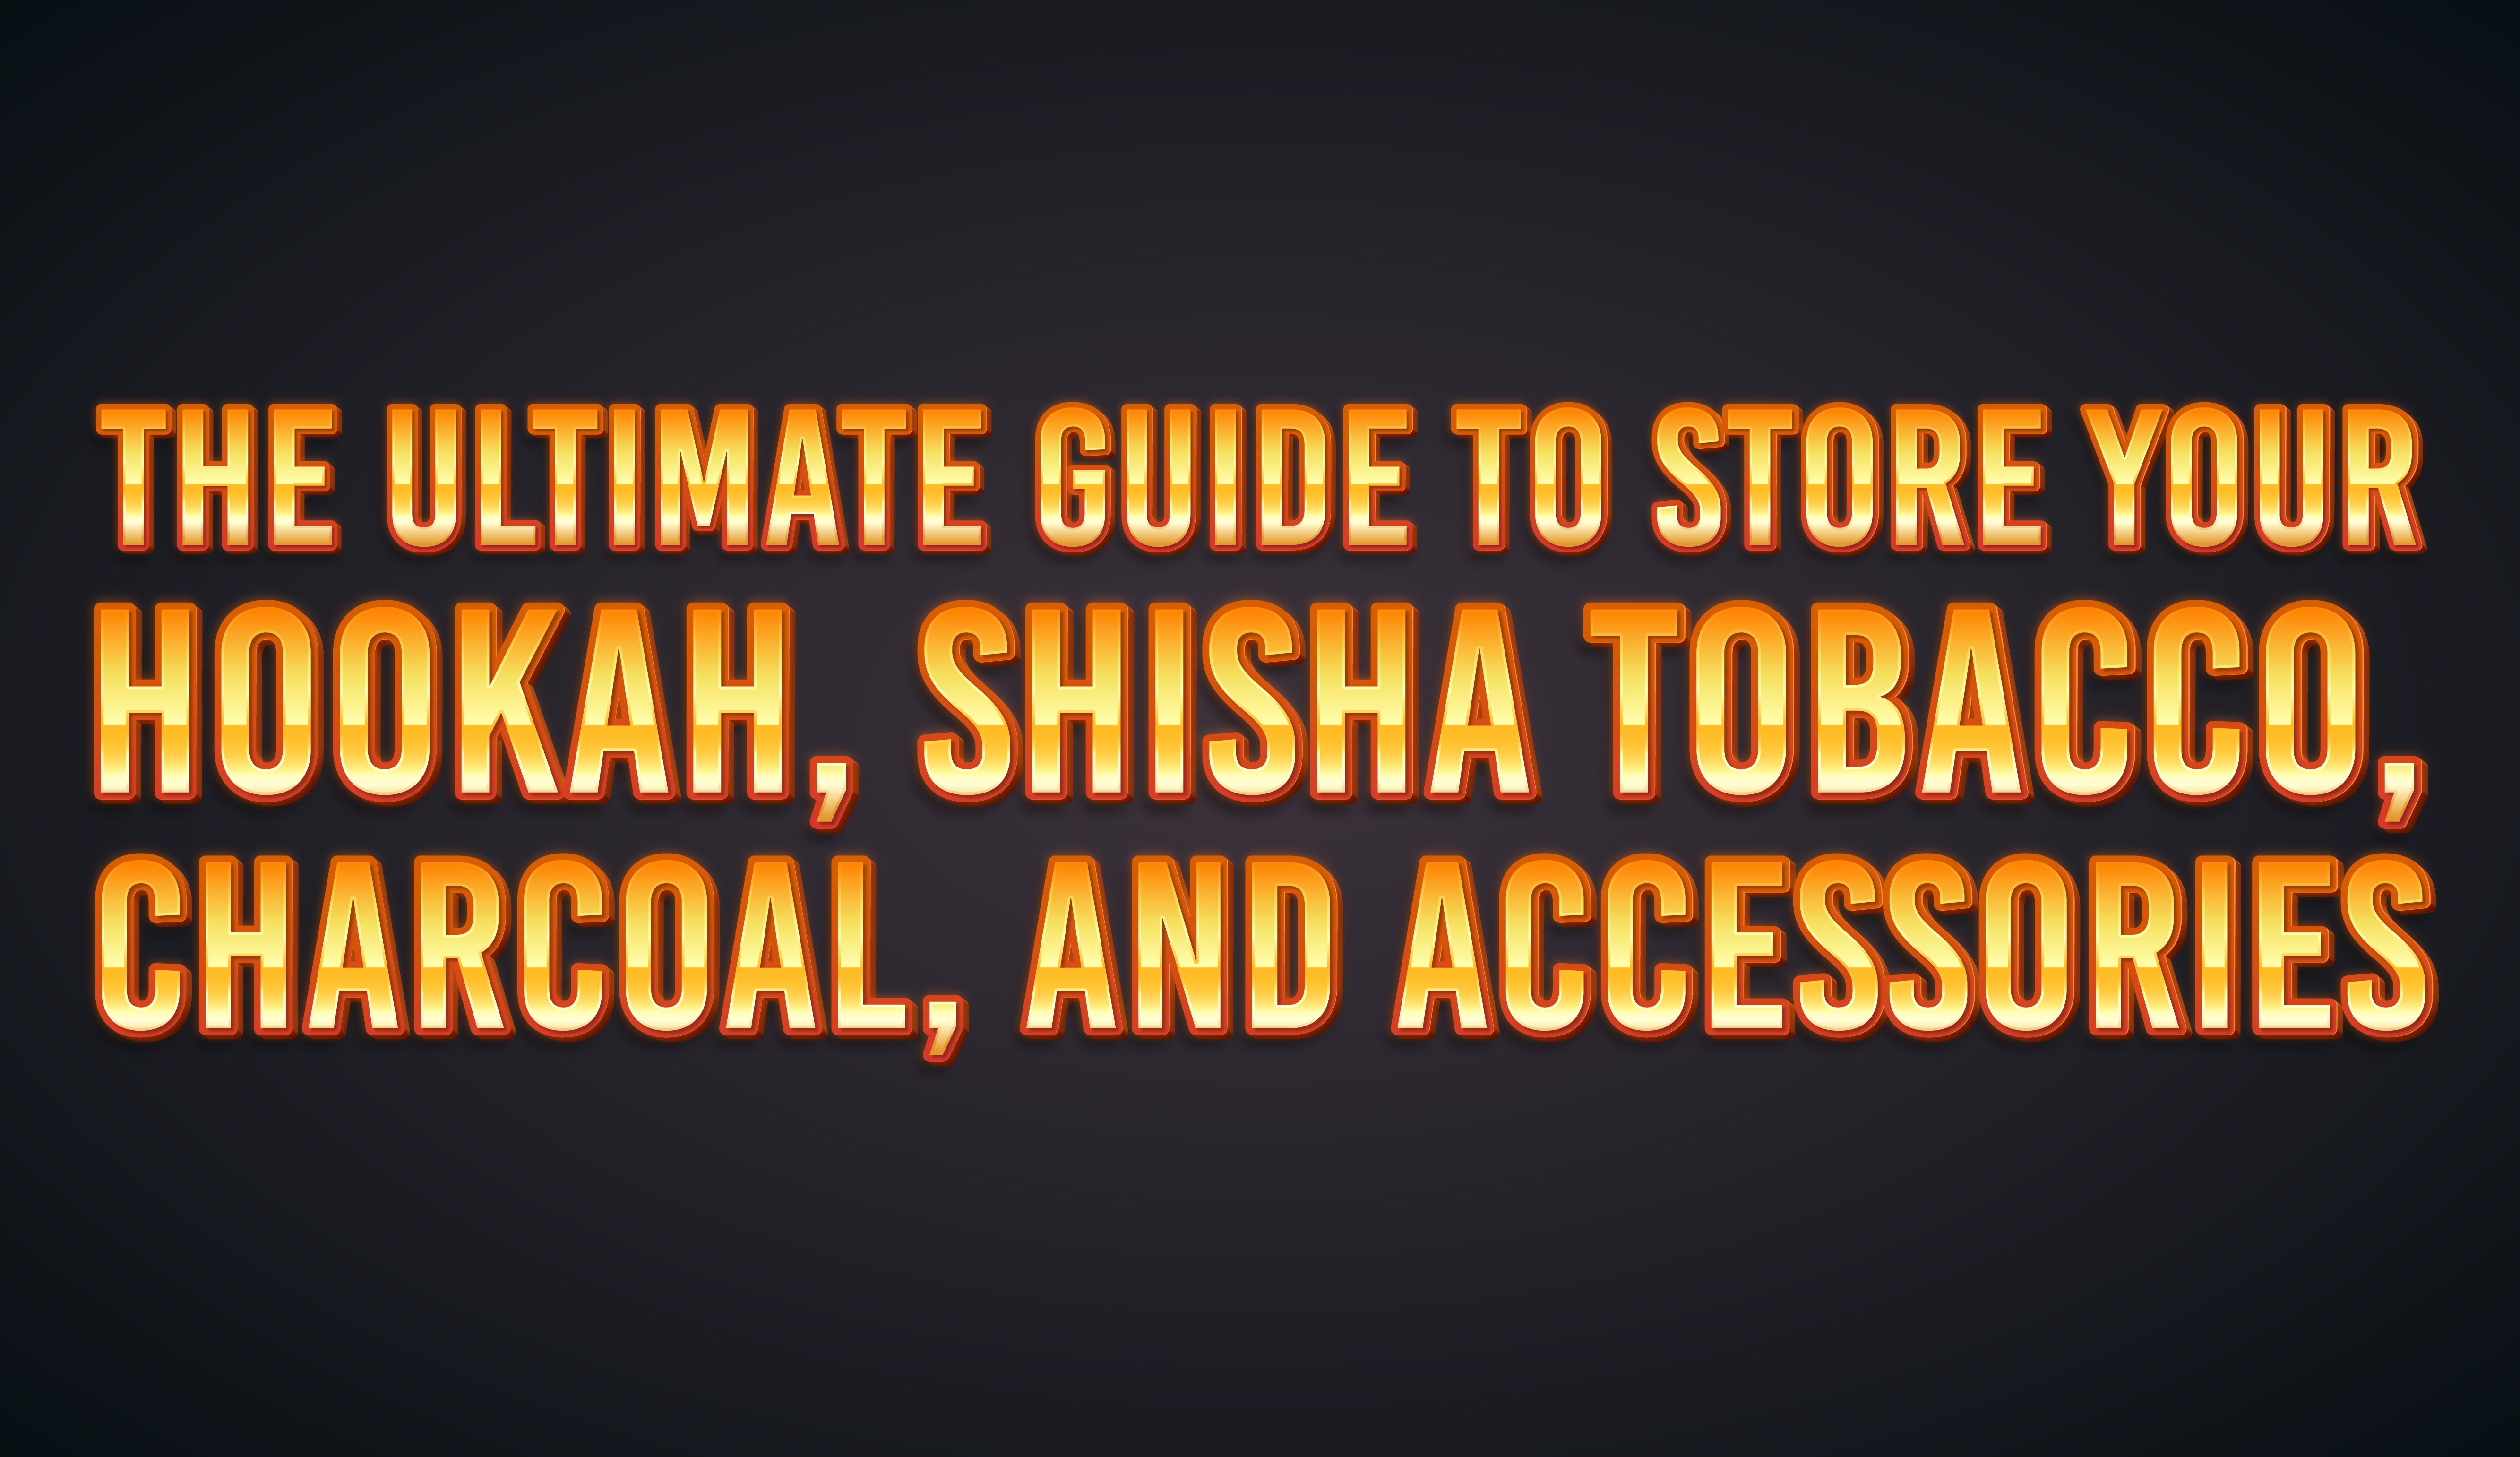 The Ultimate Guide to Store Your Hookah, Shisha Tobacco, Charcoal, and Accessories